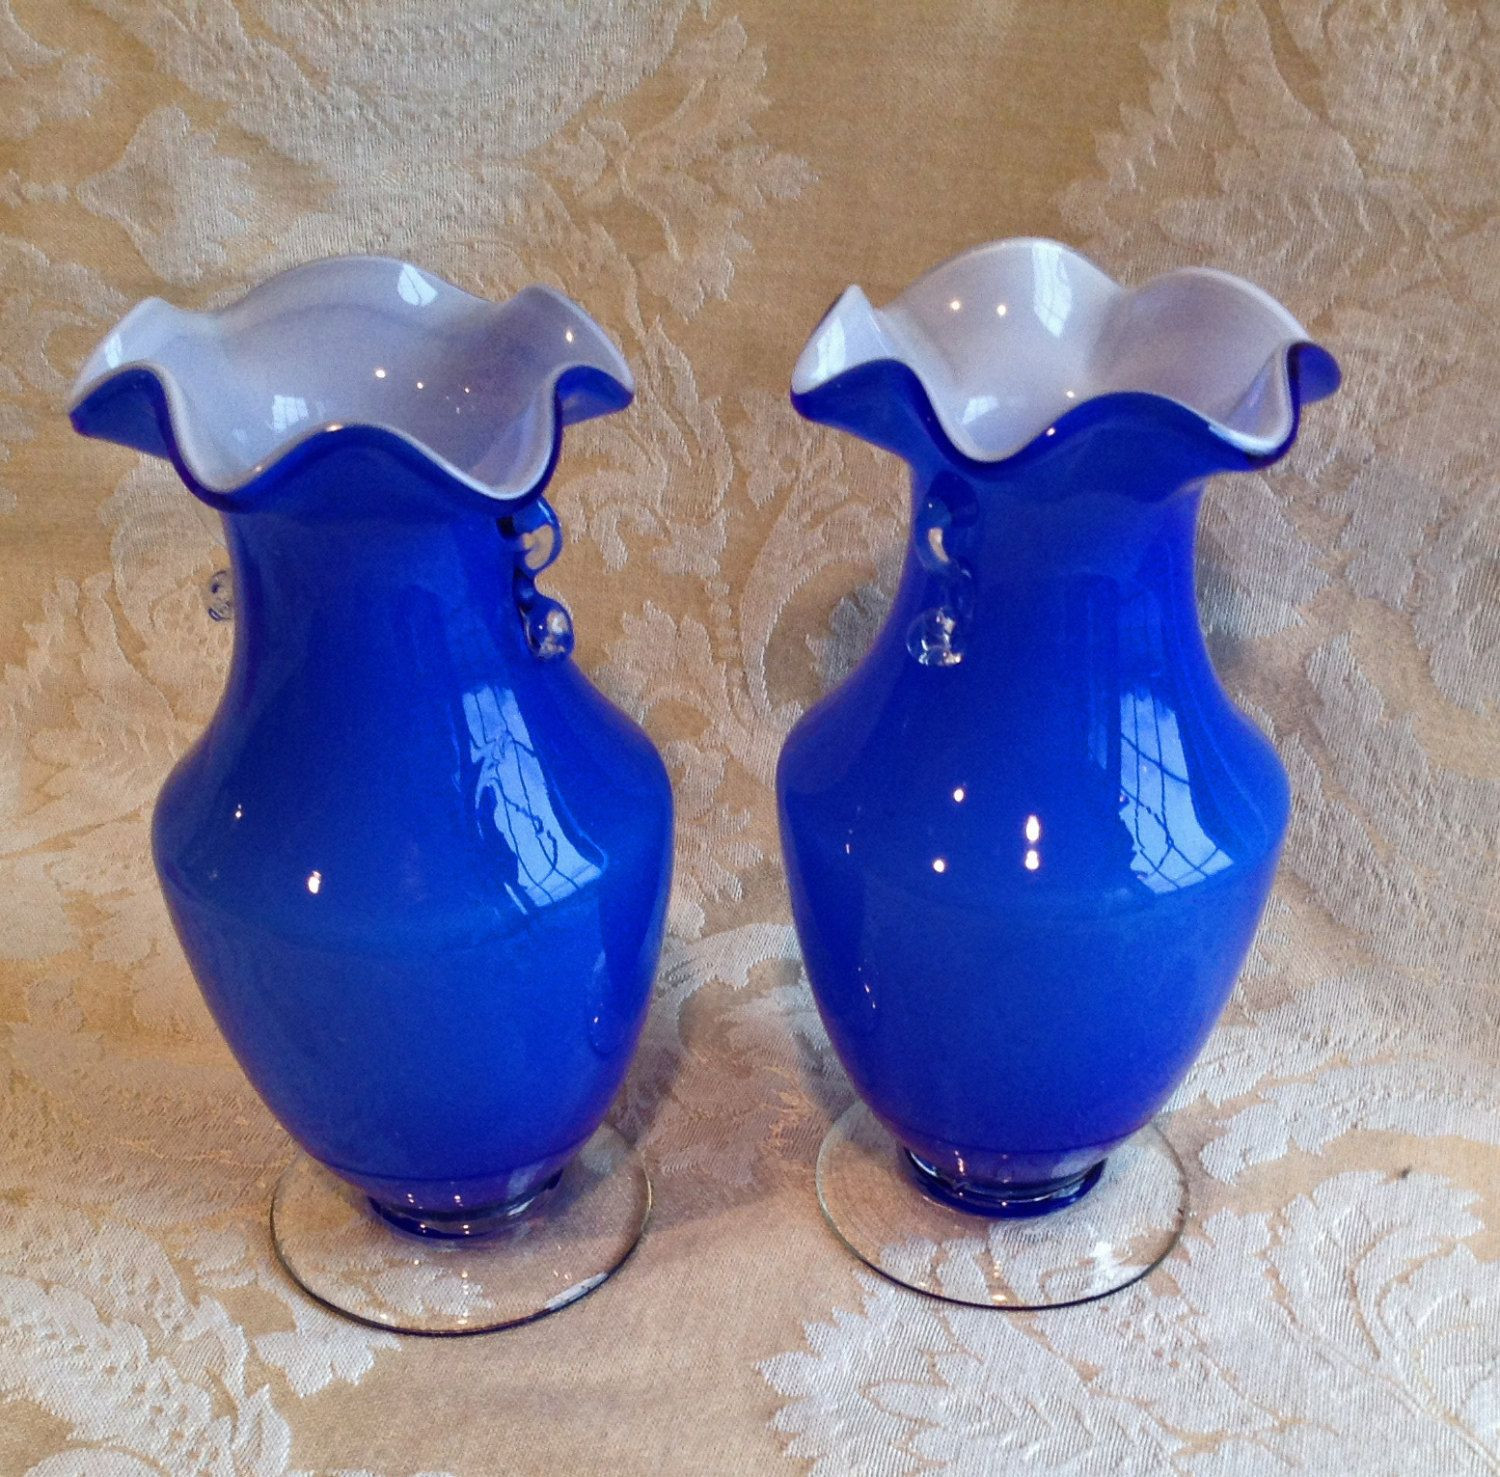 19 Fabulous Colored Blown Glass Vases 2024 free download colored blown glass vases of cased hand blown vases pair french blue vases hand blown glass with regard to pair cased hand blown vases french blue vases hand blown glass vases mint by kathyk